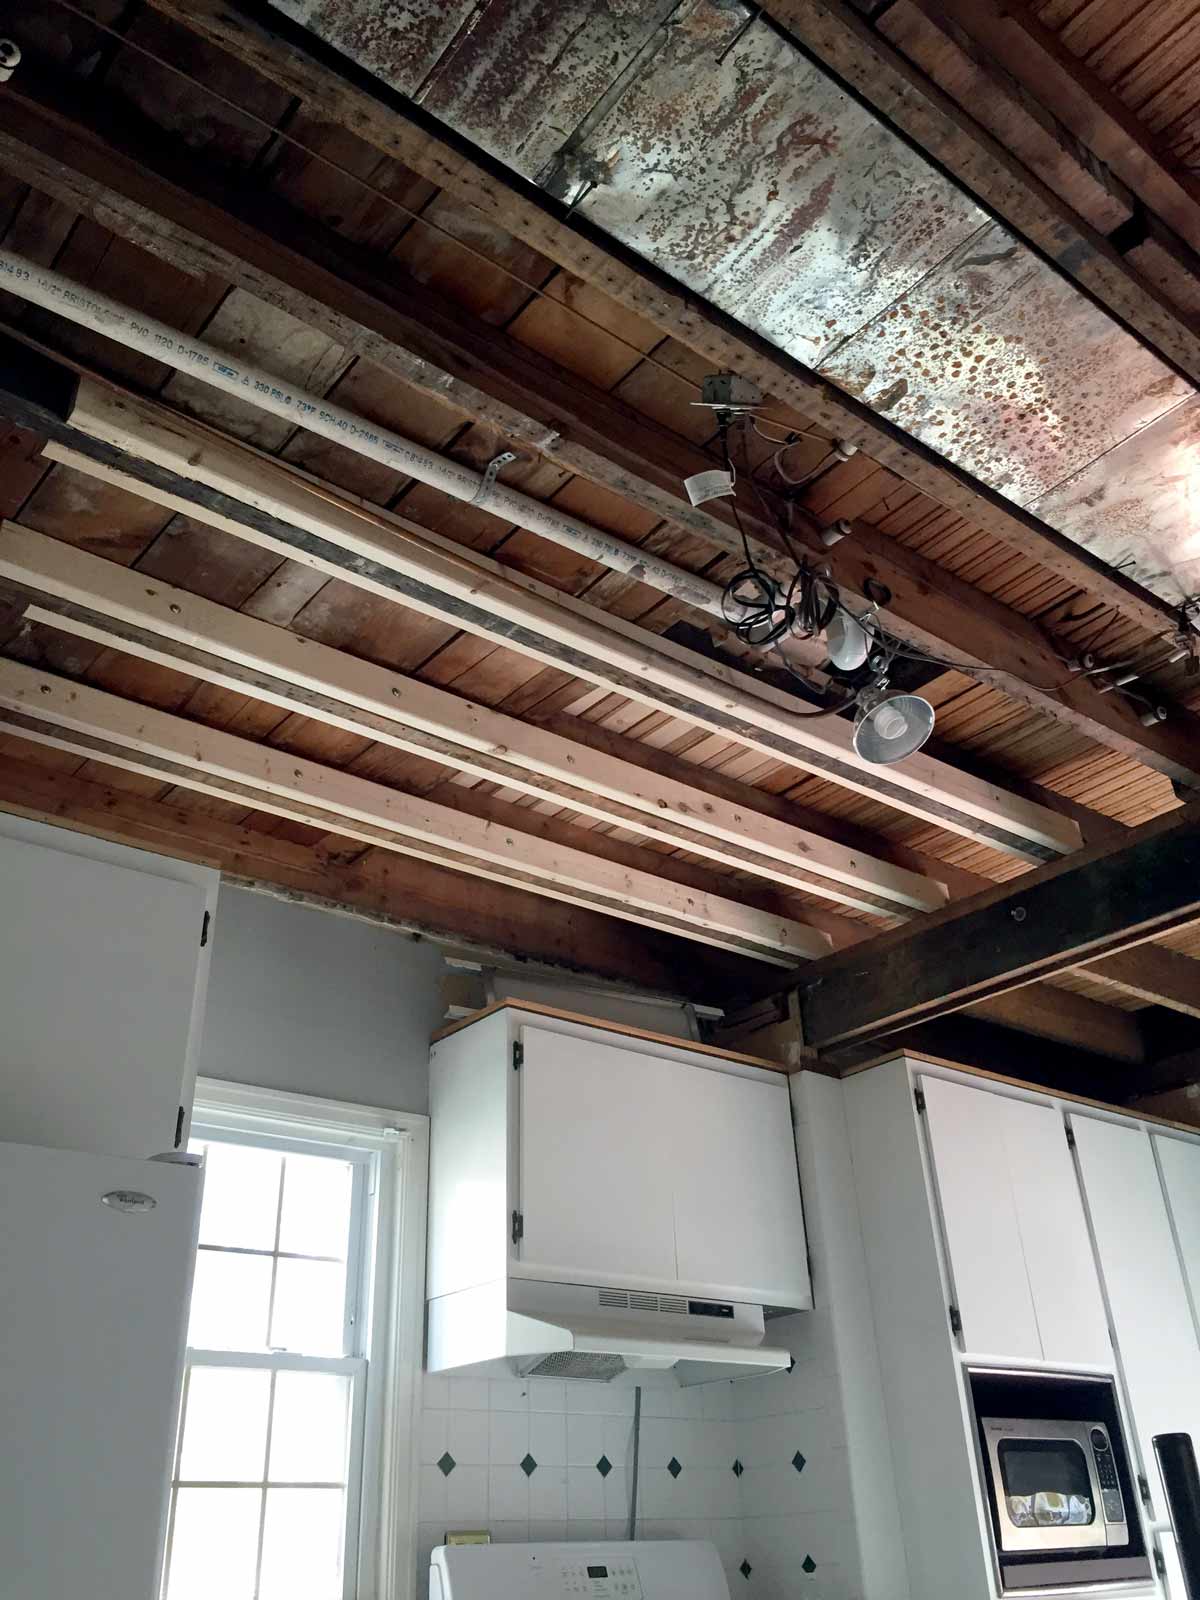 Sistering joists to support bathtub load over kitchen